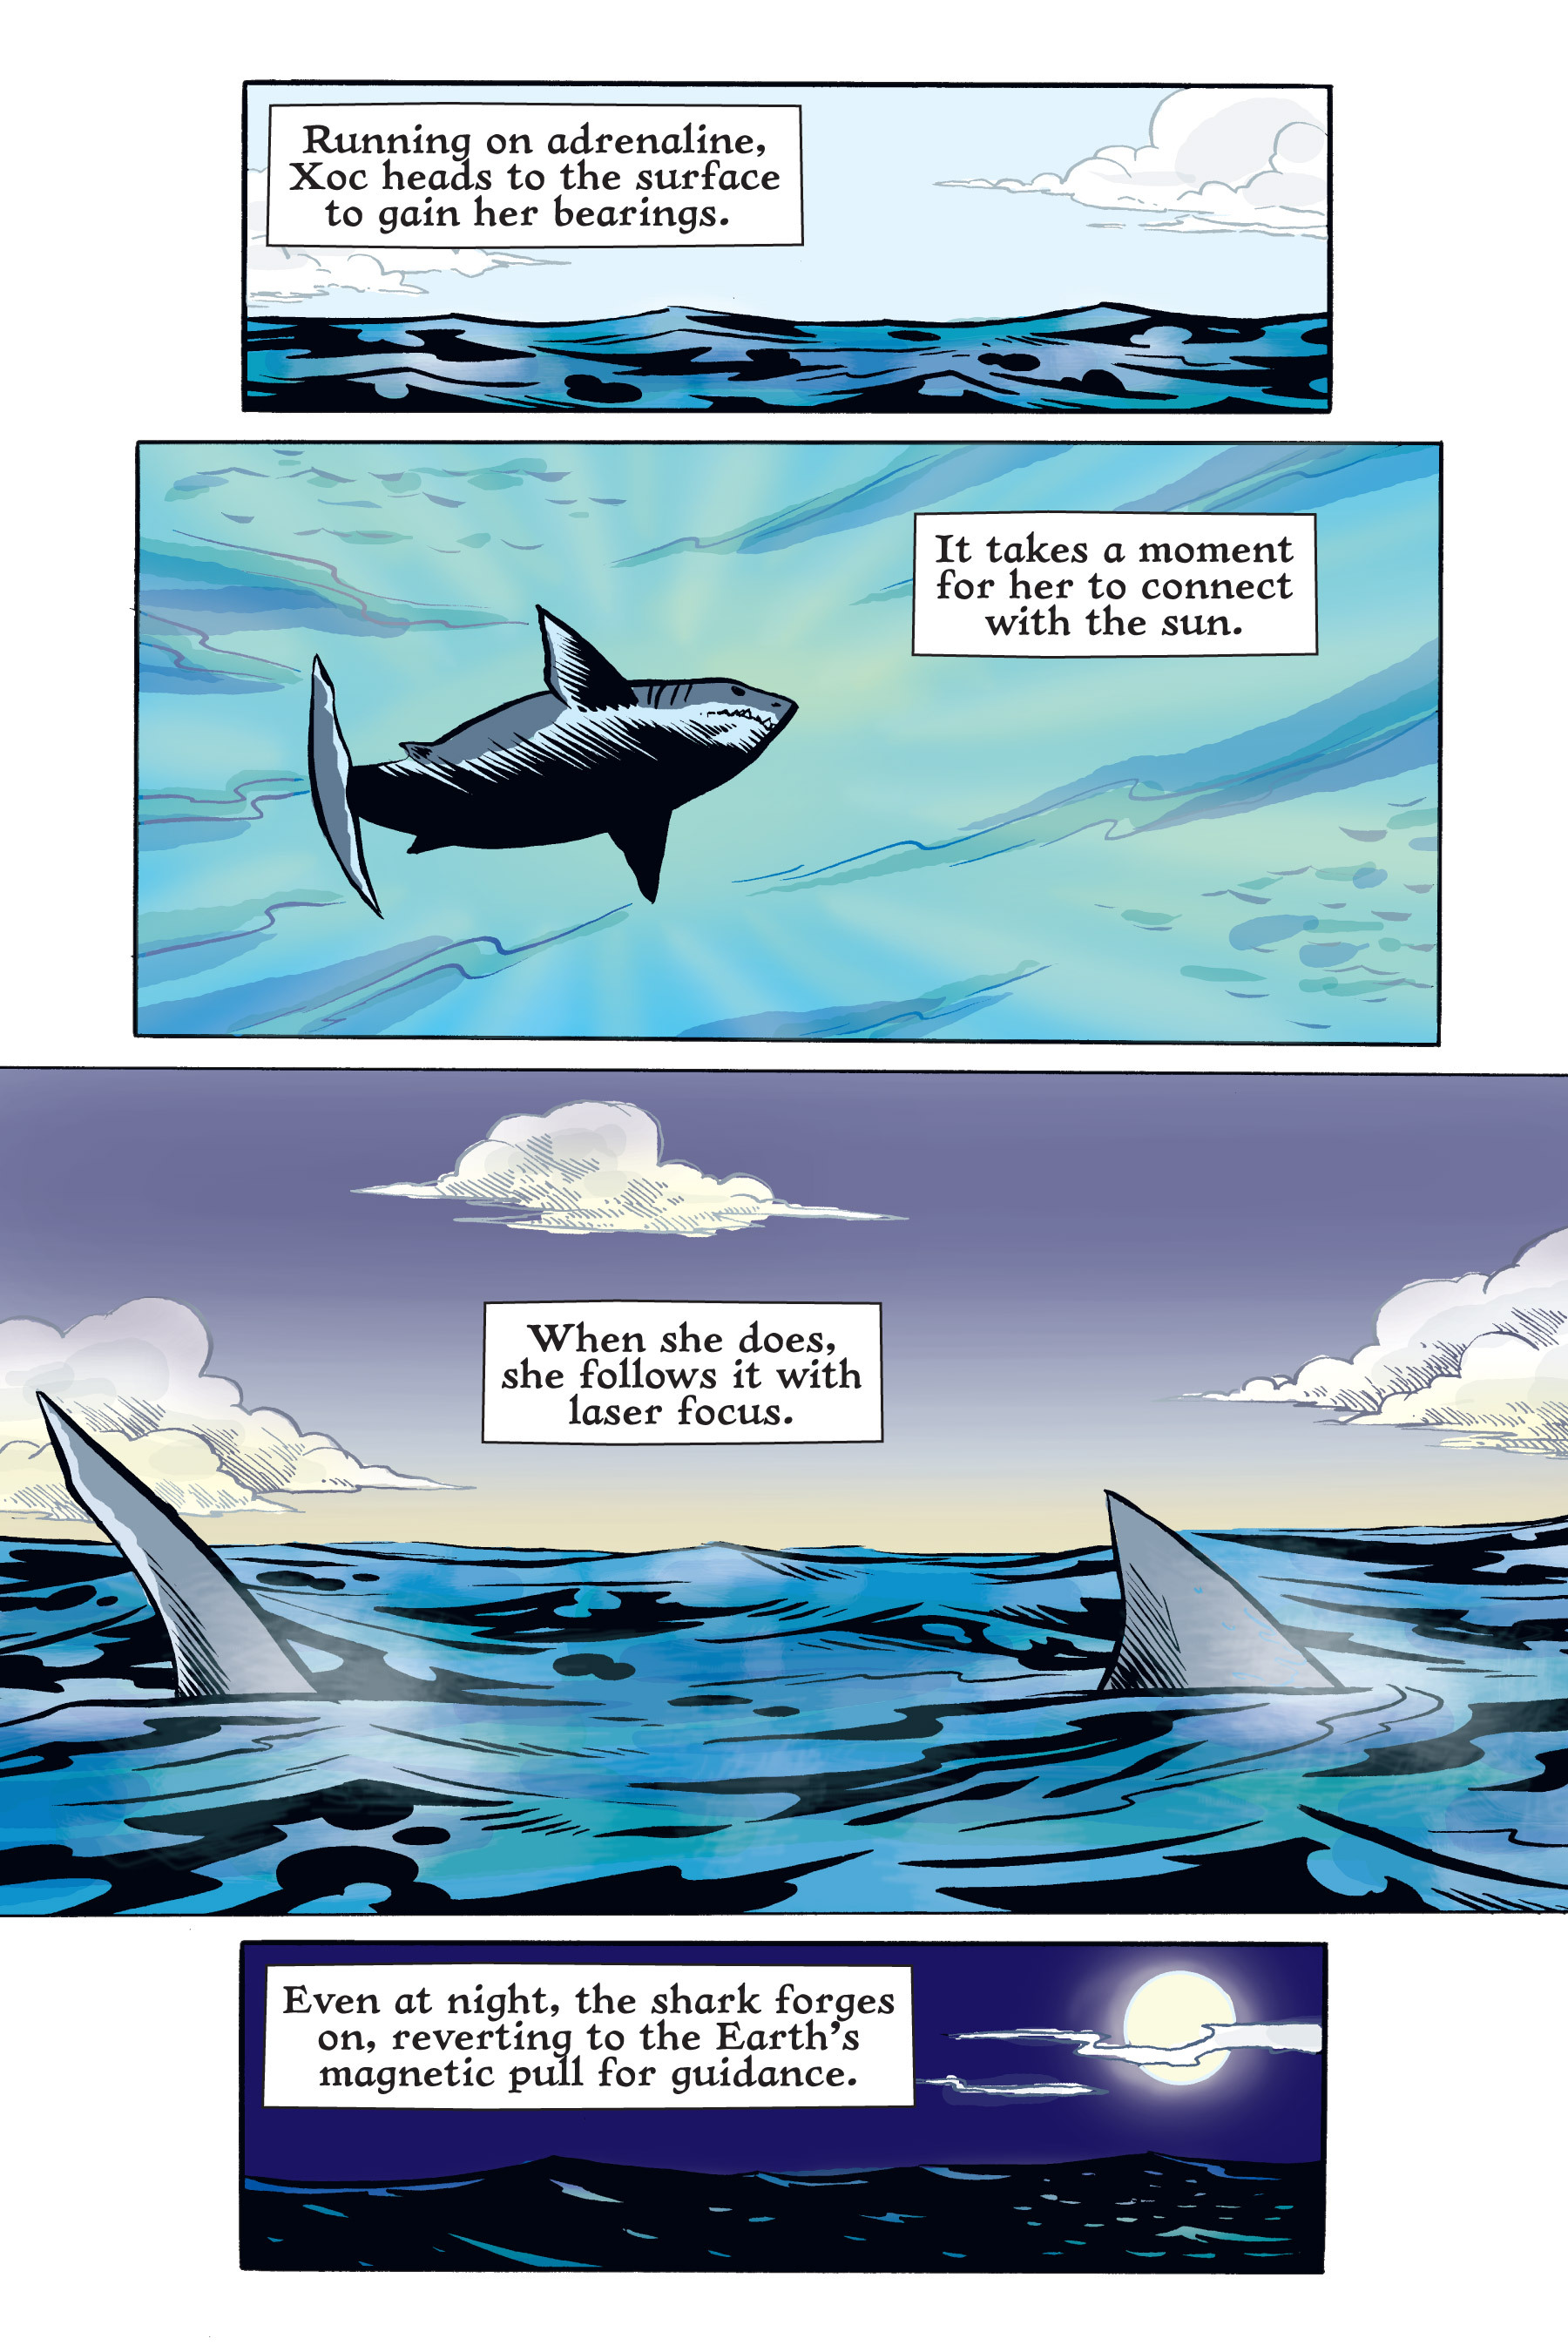 Read online Xoc: Journey of a Great White comic -  Issue # TPB - 123